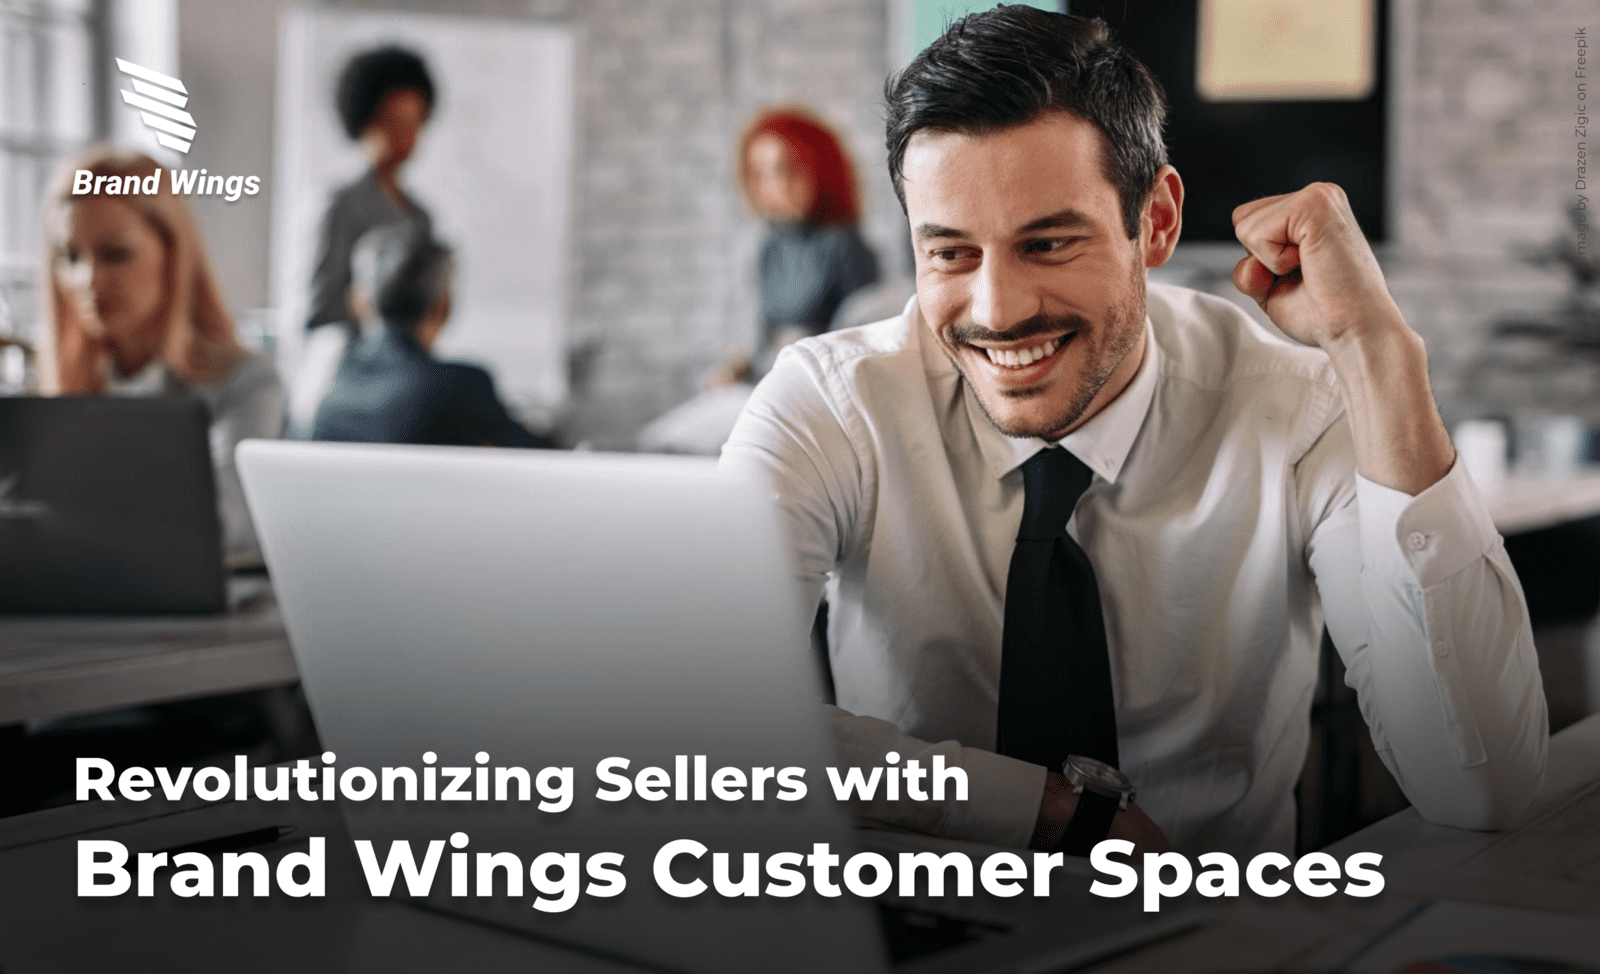 Revolutionizing Sellers with Brand Wings Customer Spaces